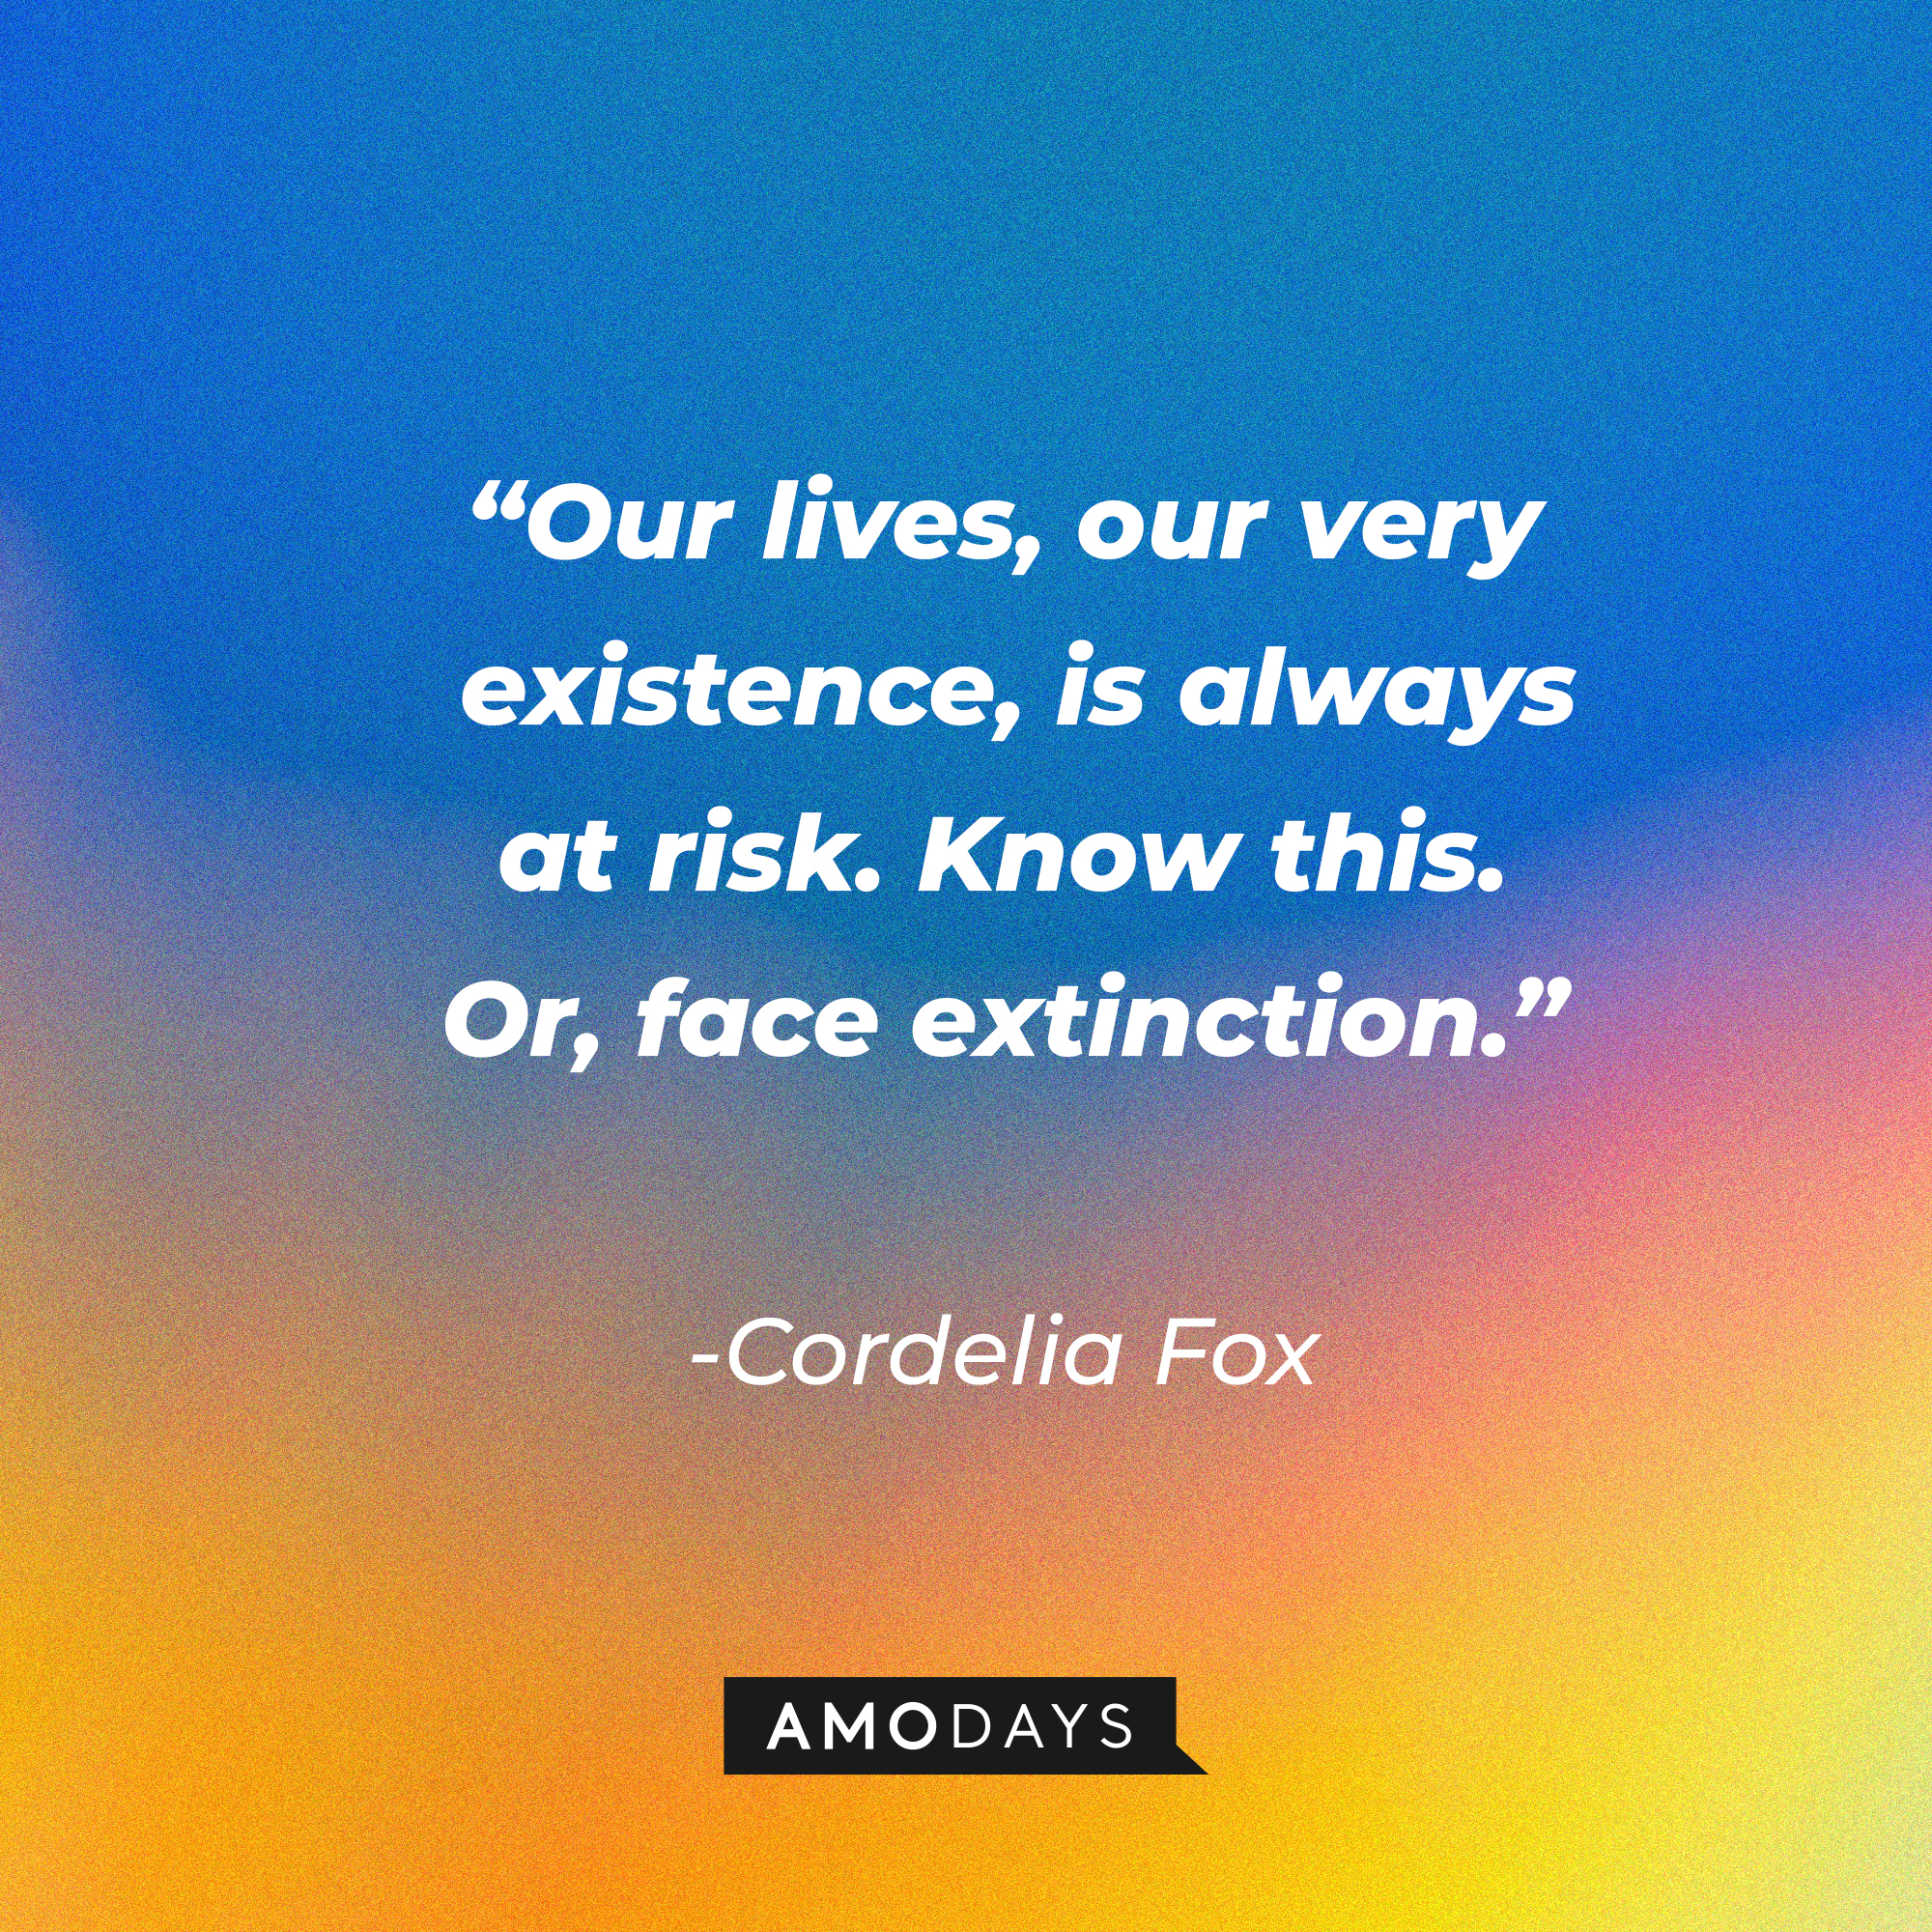 Cordelia Fox’s quote: “Our lives, our very existence, is always at risk. Know this. Or, face extinction.”  | Source: AmoDays